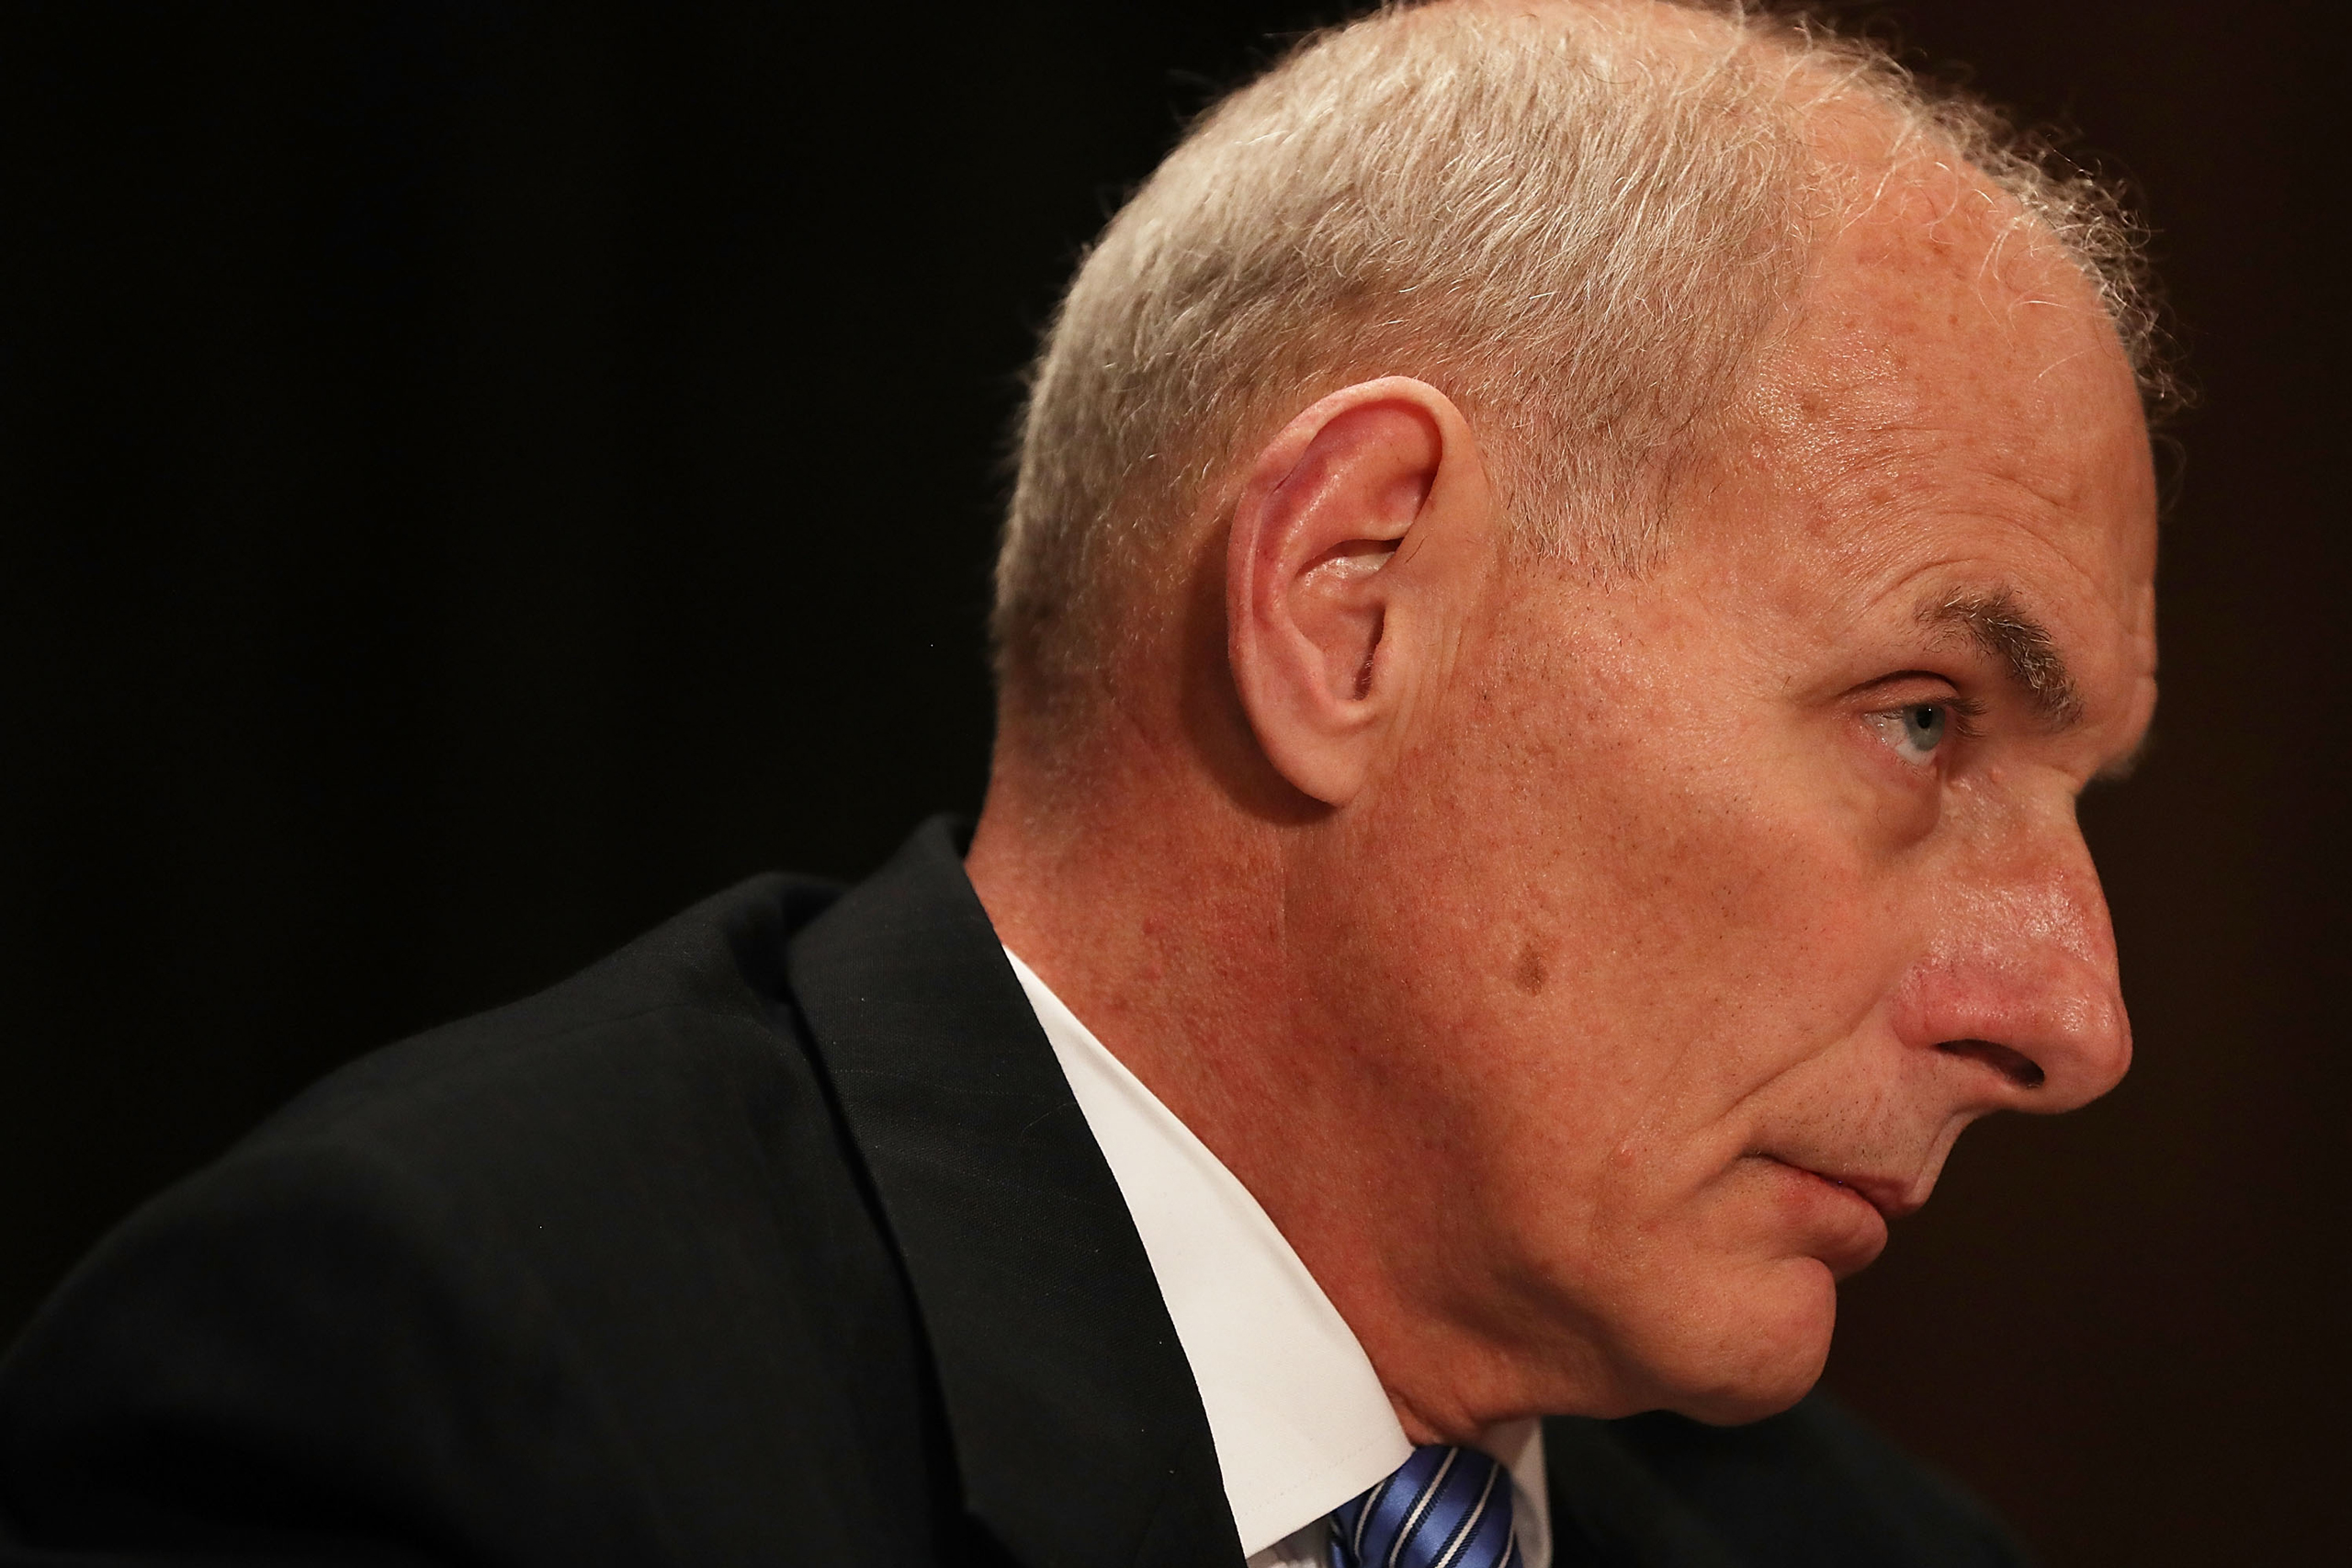 Retired Marine Gen. John Kelly attends his confirmation hearing in front of the Senate Homeland Security and Governmental Affairs Committee to run the Department of Homeland Security in Washington on Jan.10, 2017. (Joe Raedle—Getty Images)